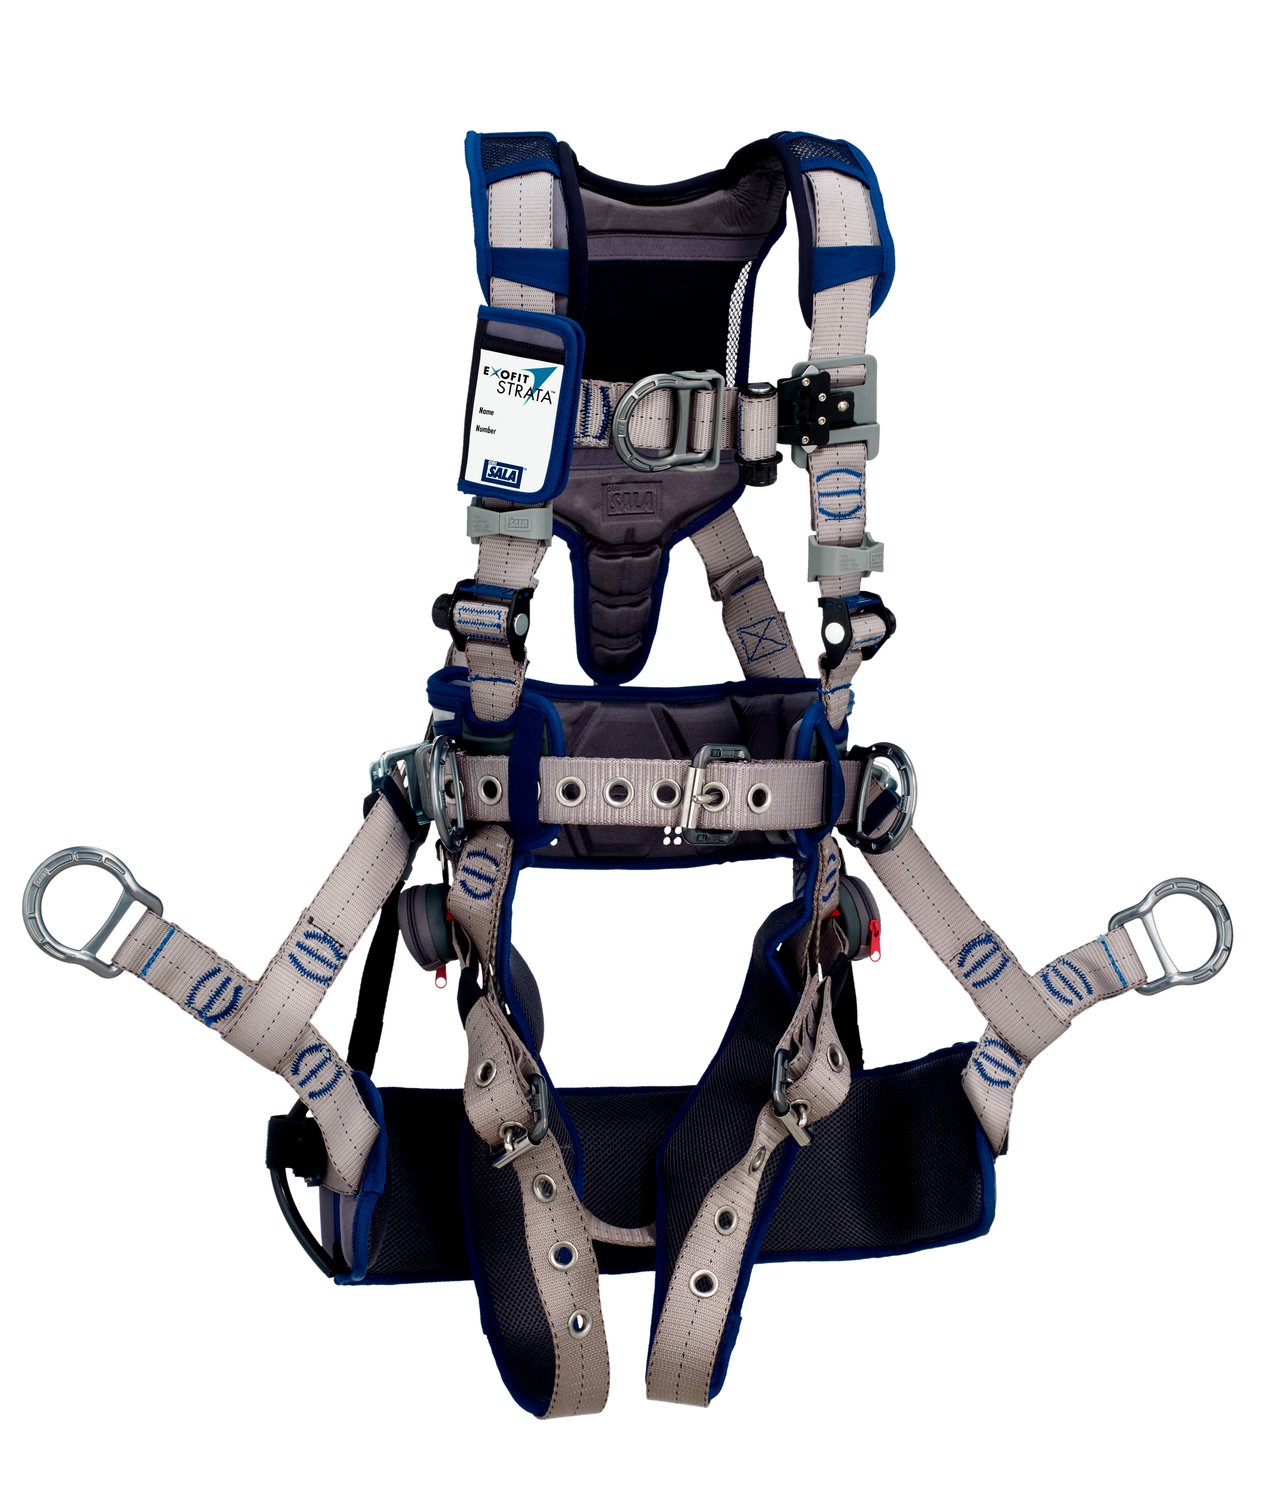 7012816085 - 3M DBI-SALA ExoFit STRATA Comfort Tower Climbing/Positioning/Suspension Safety Harness 1112585, Small